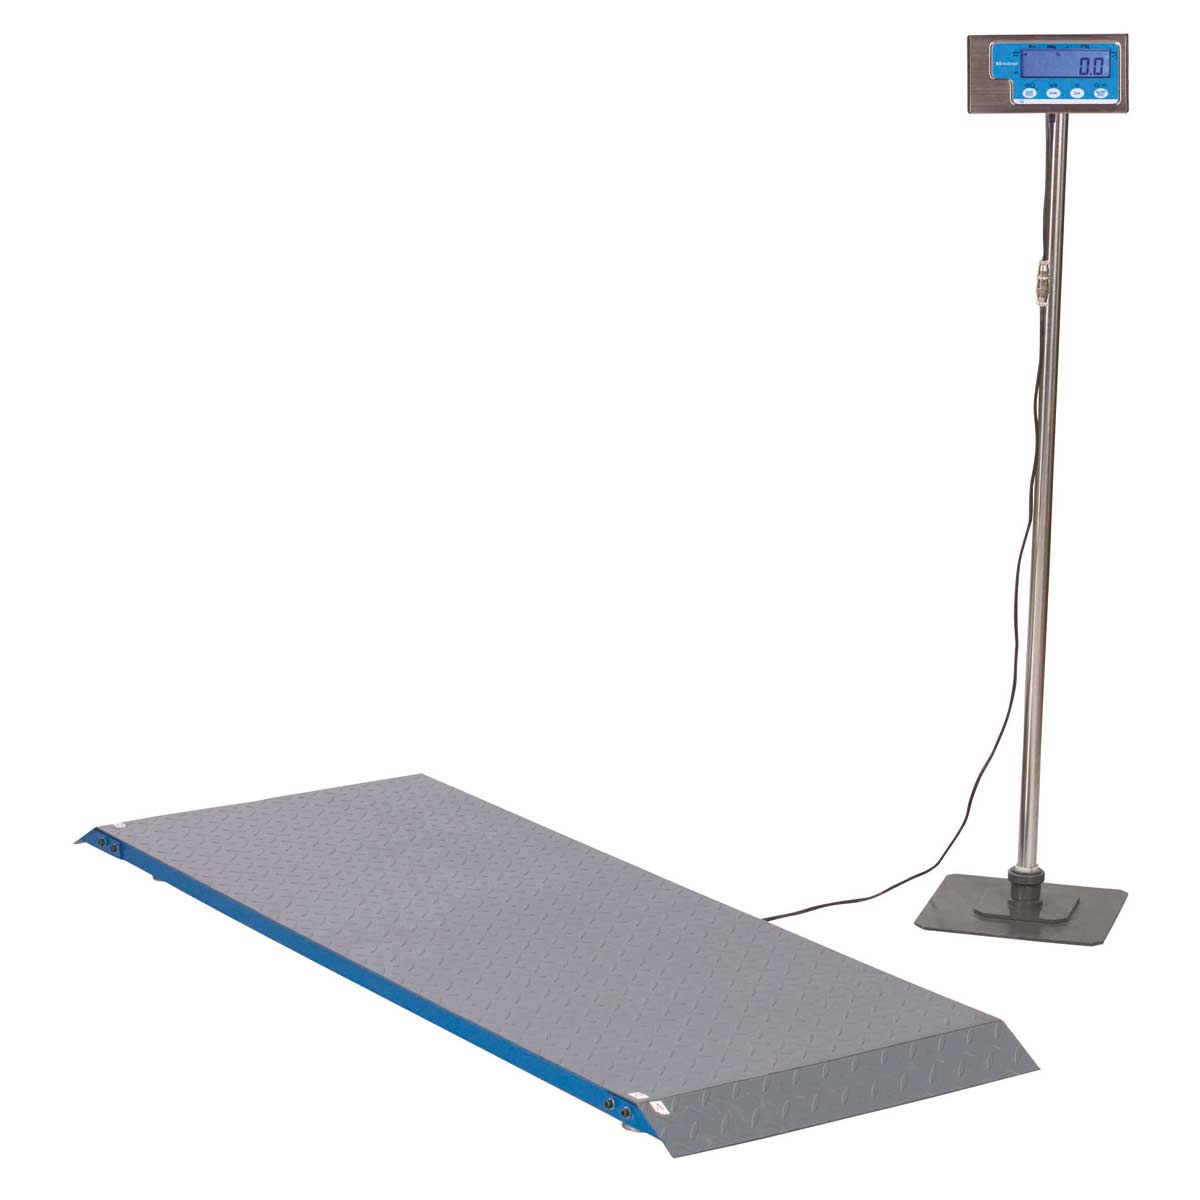 Platform animal Scale PS 1000 up to 500 kg